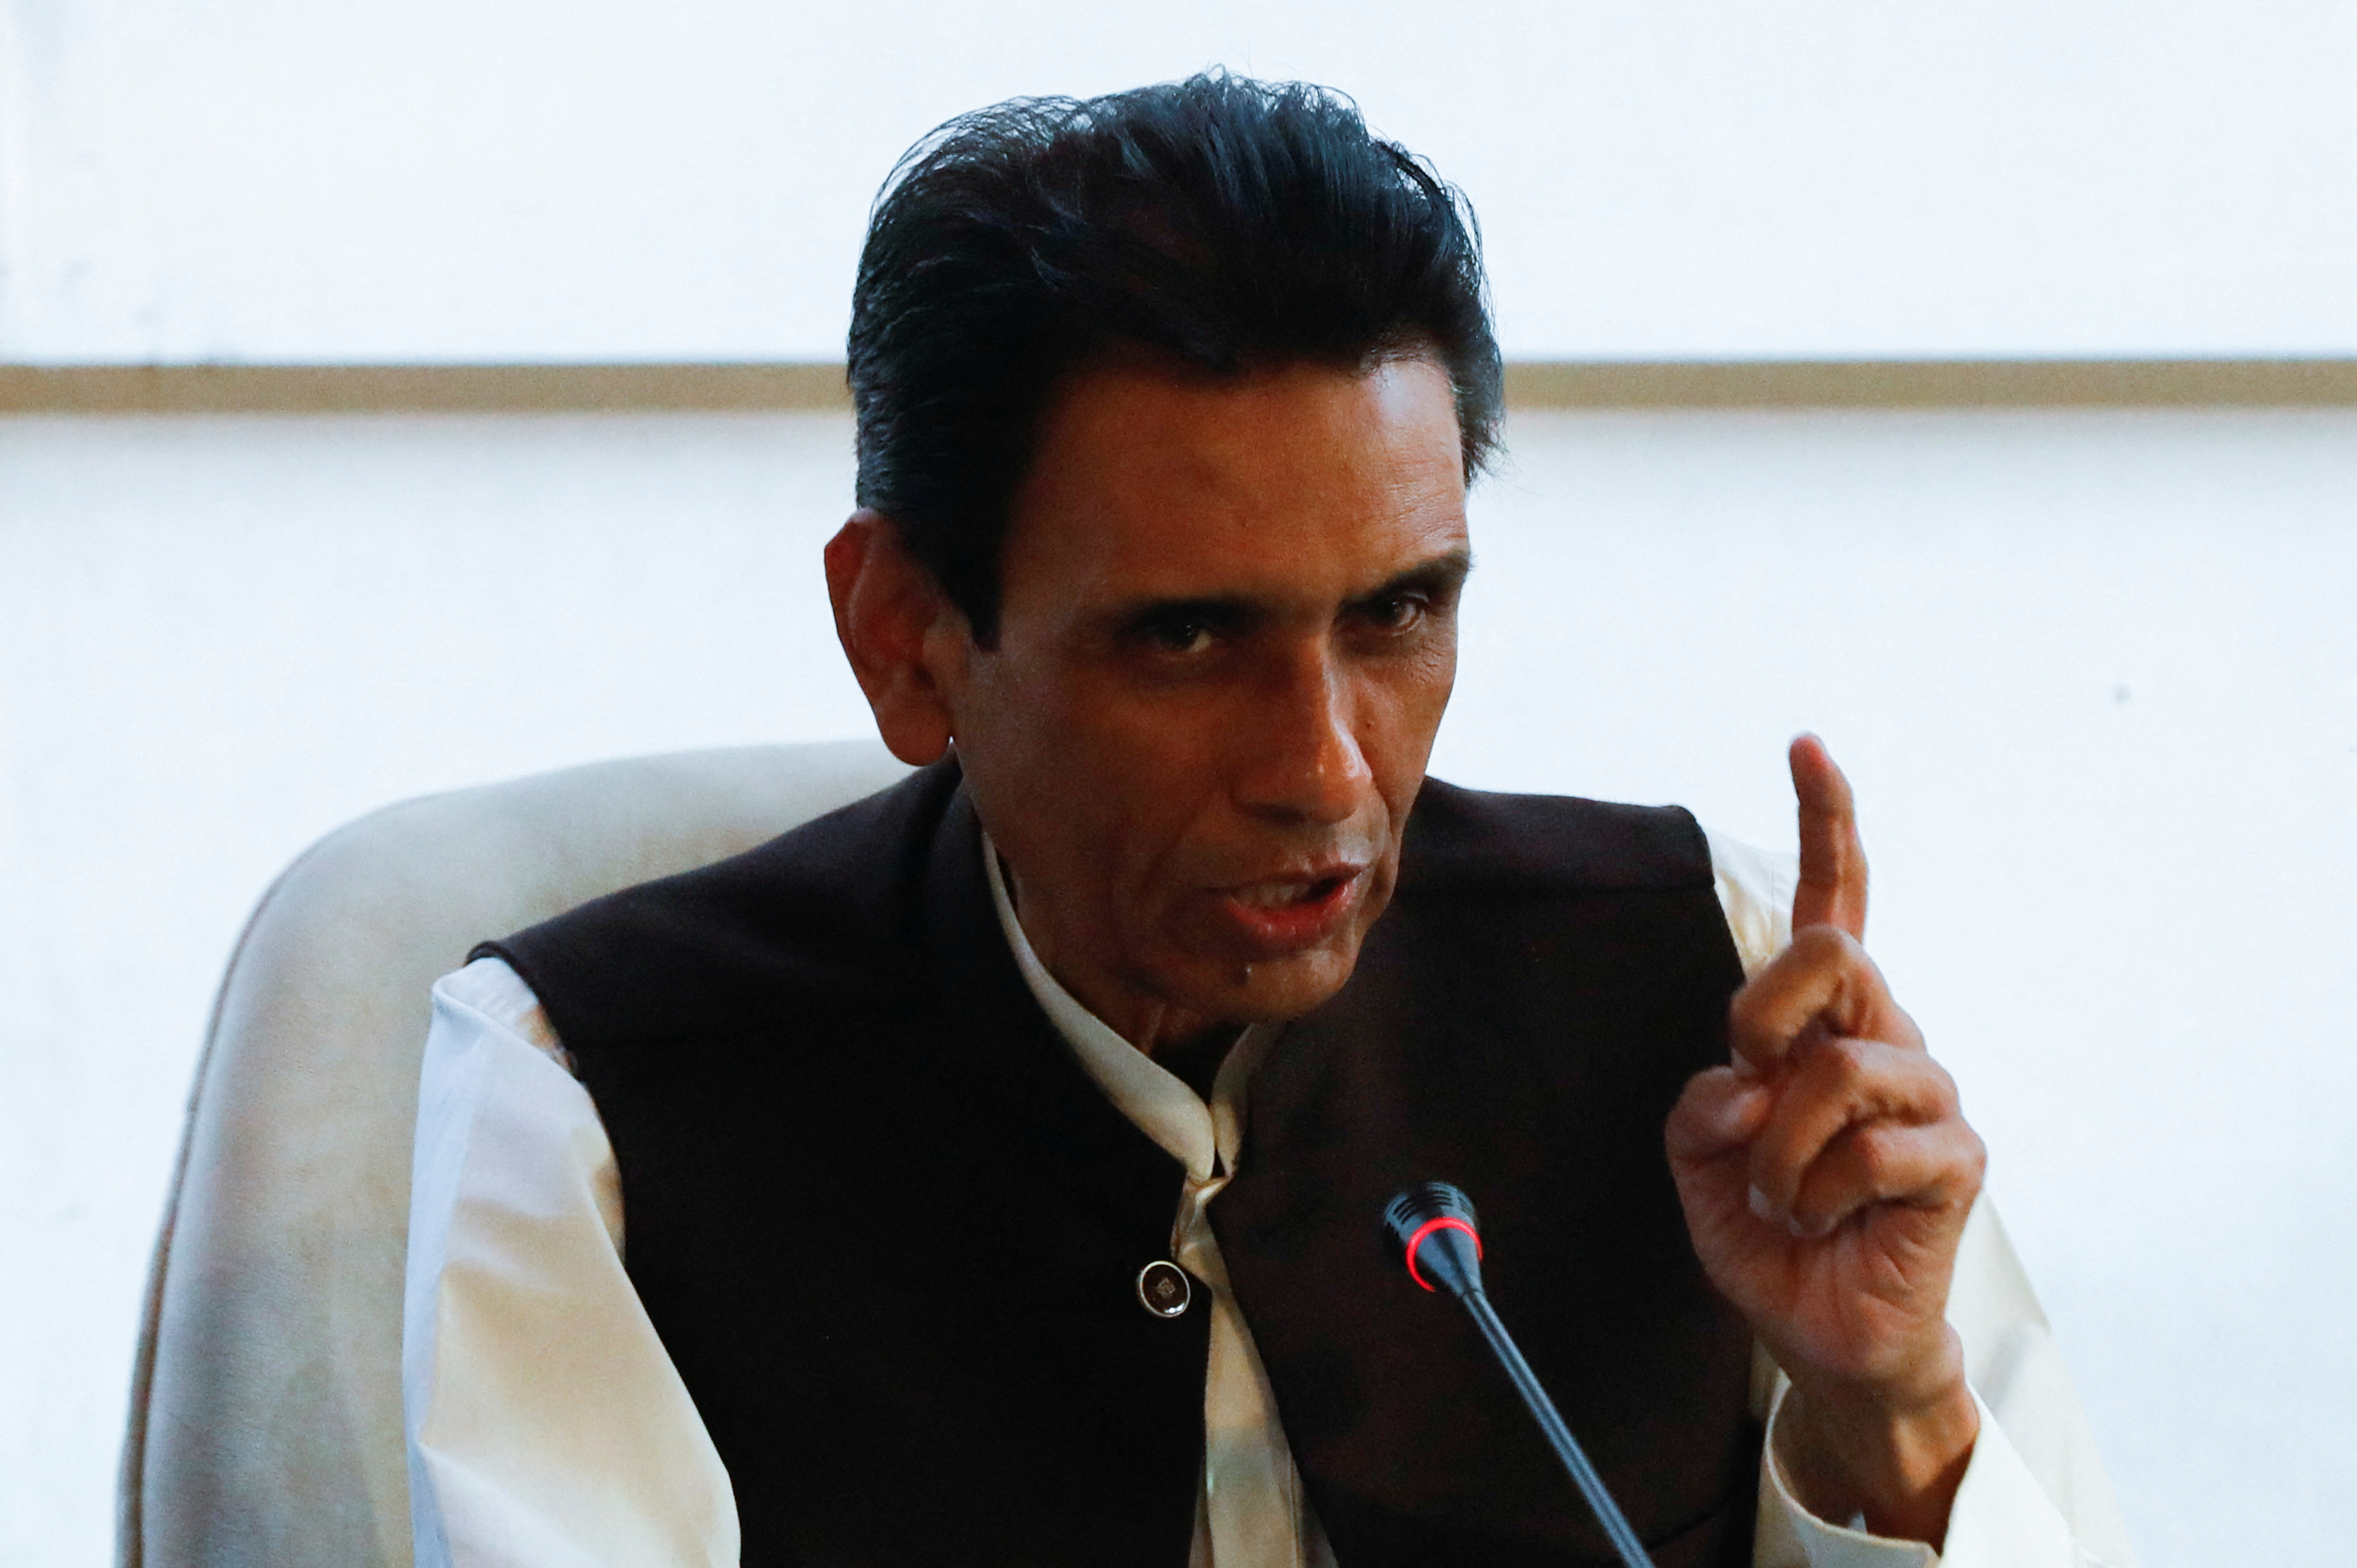 Khalid Maqbool Siddiqui, leader of the Muttahida Qaumi Movement political party, gestures during a joint press conference in Islamabad